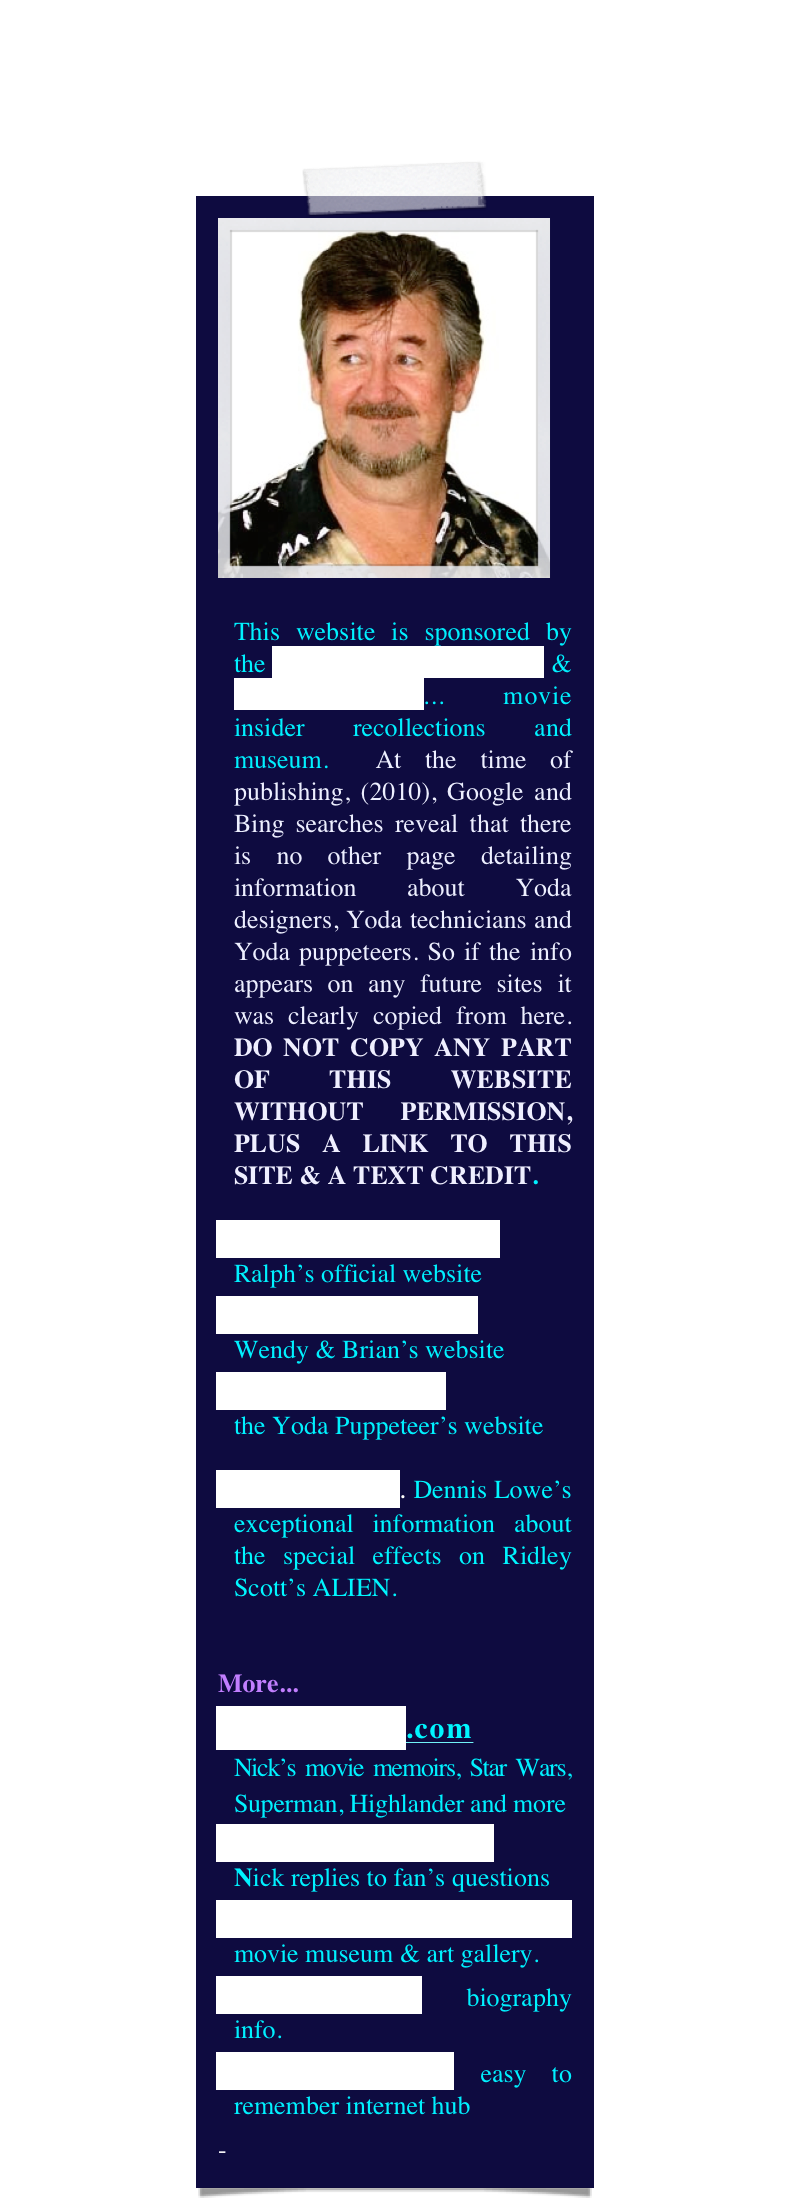 ￼

This website is sponsored by the Yoda Guy Movie Exhibit & CineSecrets.com... movie insider recollections and museum.  At the time of publishing, (2010), Google and Bing searches reveal that there is no other page detailing information about Yoda designers, Yoda technicians and Yoda puppeteers. So if the info appears on any future sites it was clearly copied from here. DO NOT COPY ANY PART OF THIS WEBSITE WITHOUT PERMISSION, PLUS A LINK TO THIS SITE & A TEXT CREDIT.
RalphMcQuarrie.com
Ralph’s official website
The World of Froud
Wendy & Brian’s website
DaveBarclay.com 
the Yoda Puppeteer’s website
Alien Makers. Dennis Lowe’s exceptional information about the special effects on Ridley Scott’s ALIEN.


More...
CineSecrets.com 
Nick’s movie memoirs, Star Wars, Superman, Highlander and more
Questions & Answers   
Nick replies to fan’s questions
YodaGuyMovieExhibit movie museum & art gallery.
NickMaley.com biography info.
thatYodaGuy.com easy to remember internet hub
